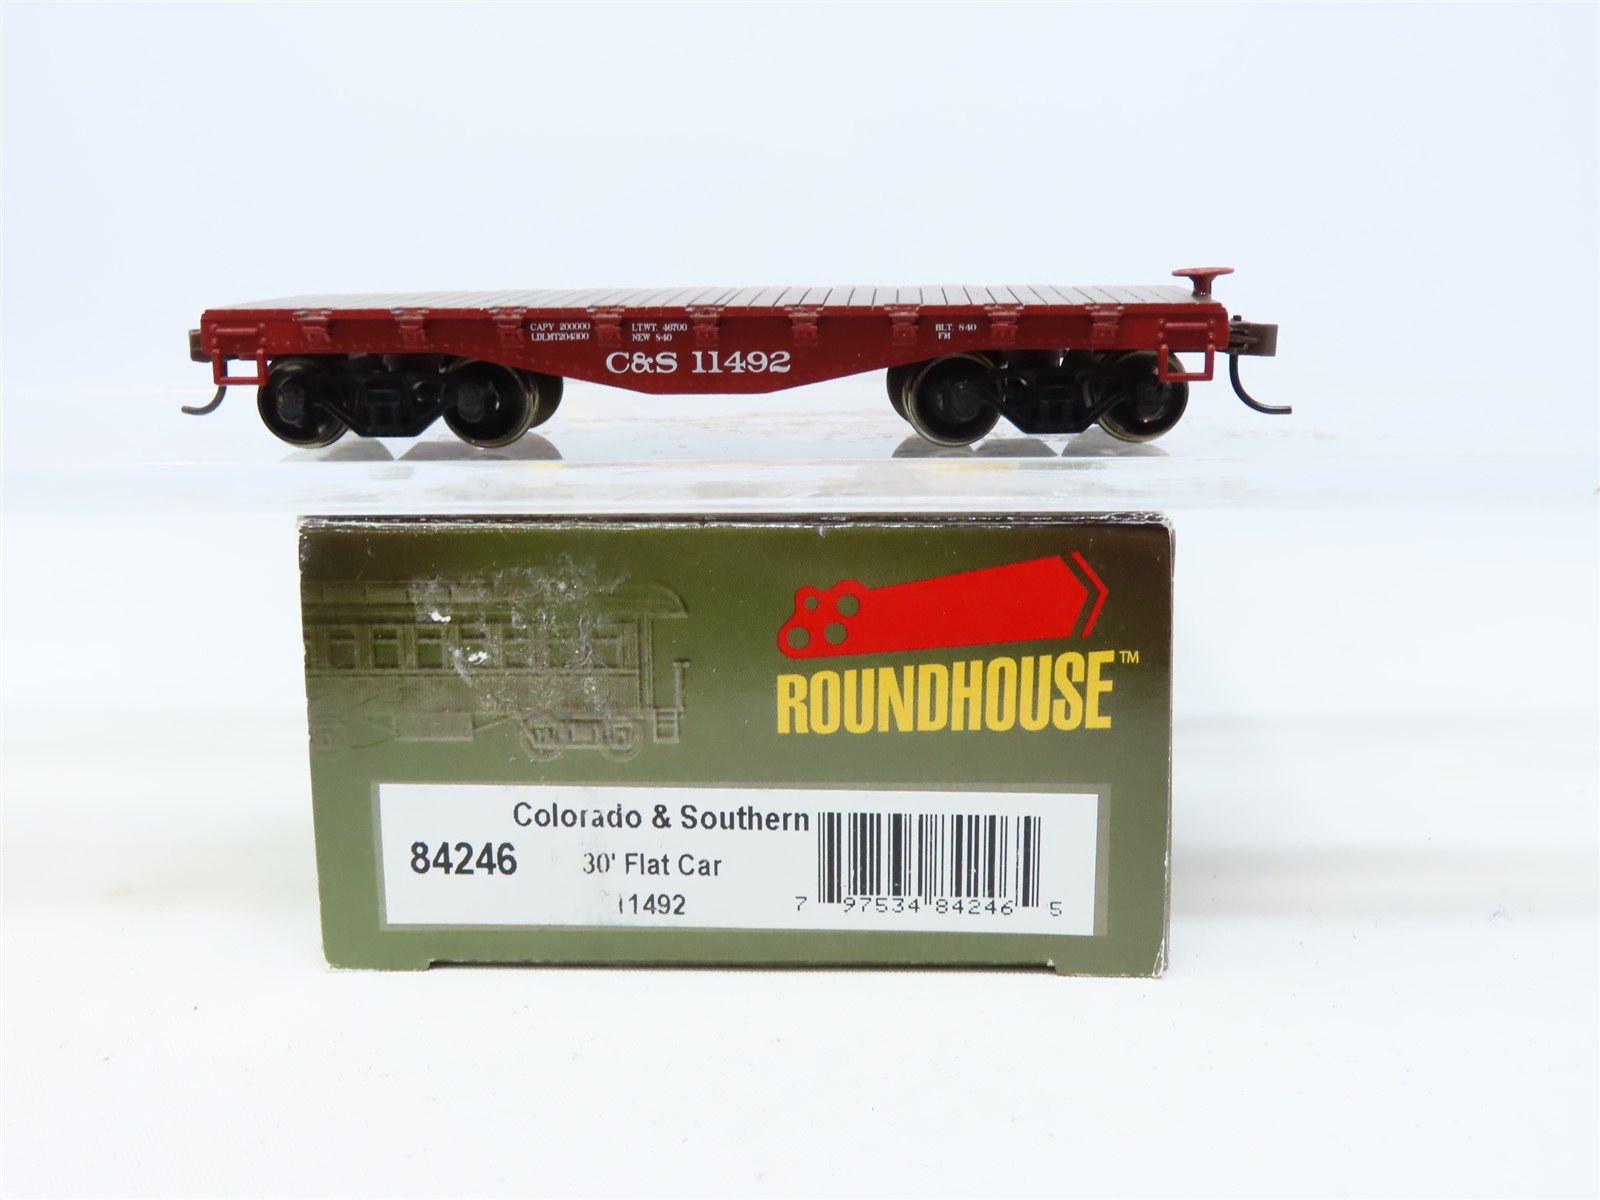 HO Scale Roundhouse #84246 C&S Colorado & Southern 30' Flat Car #11492